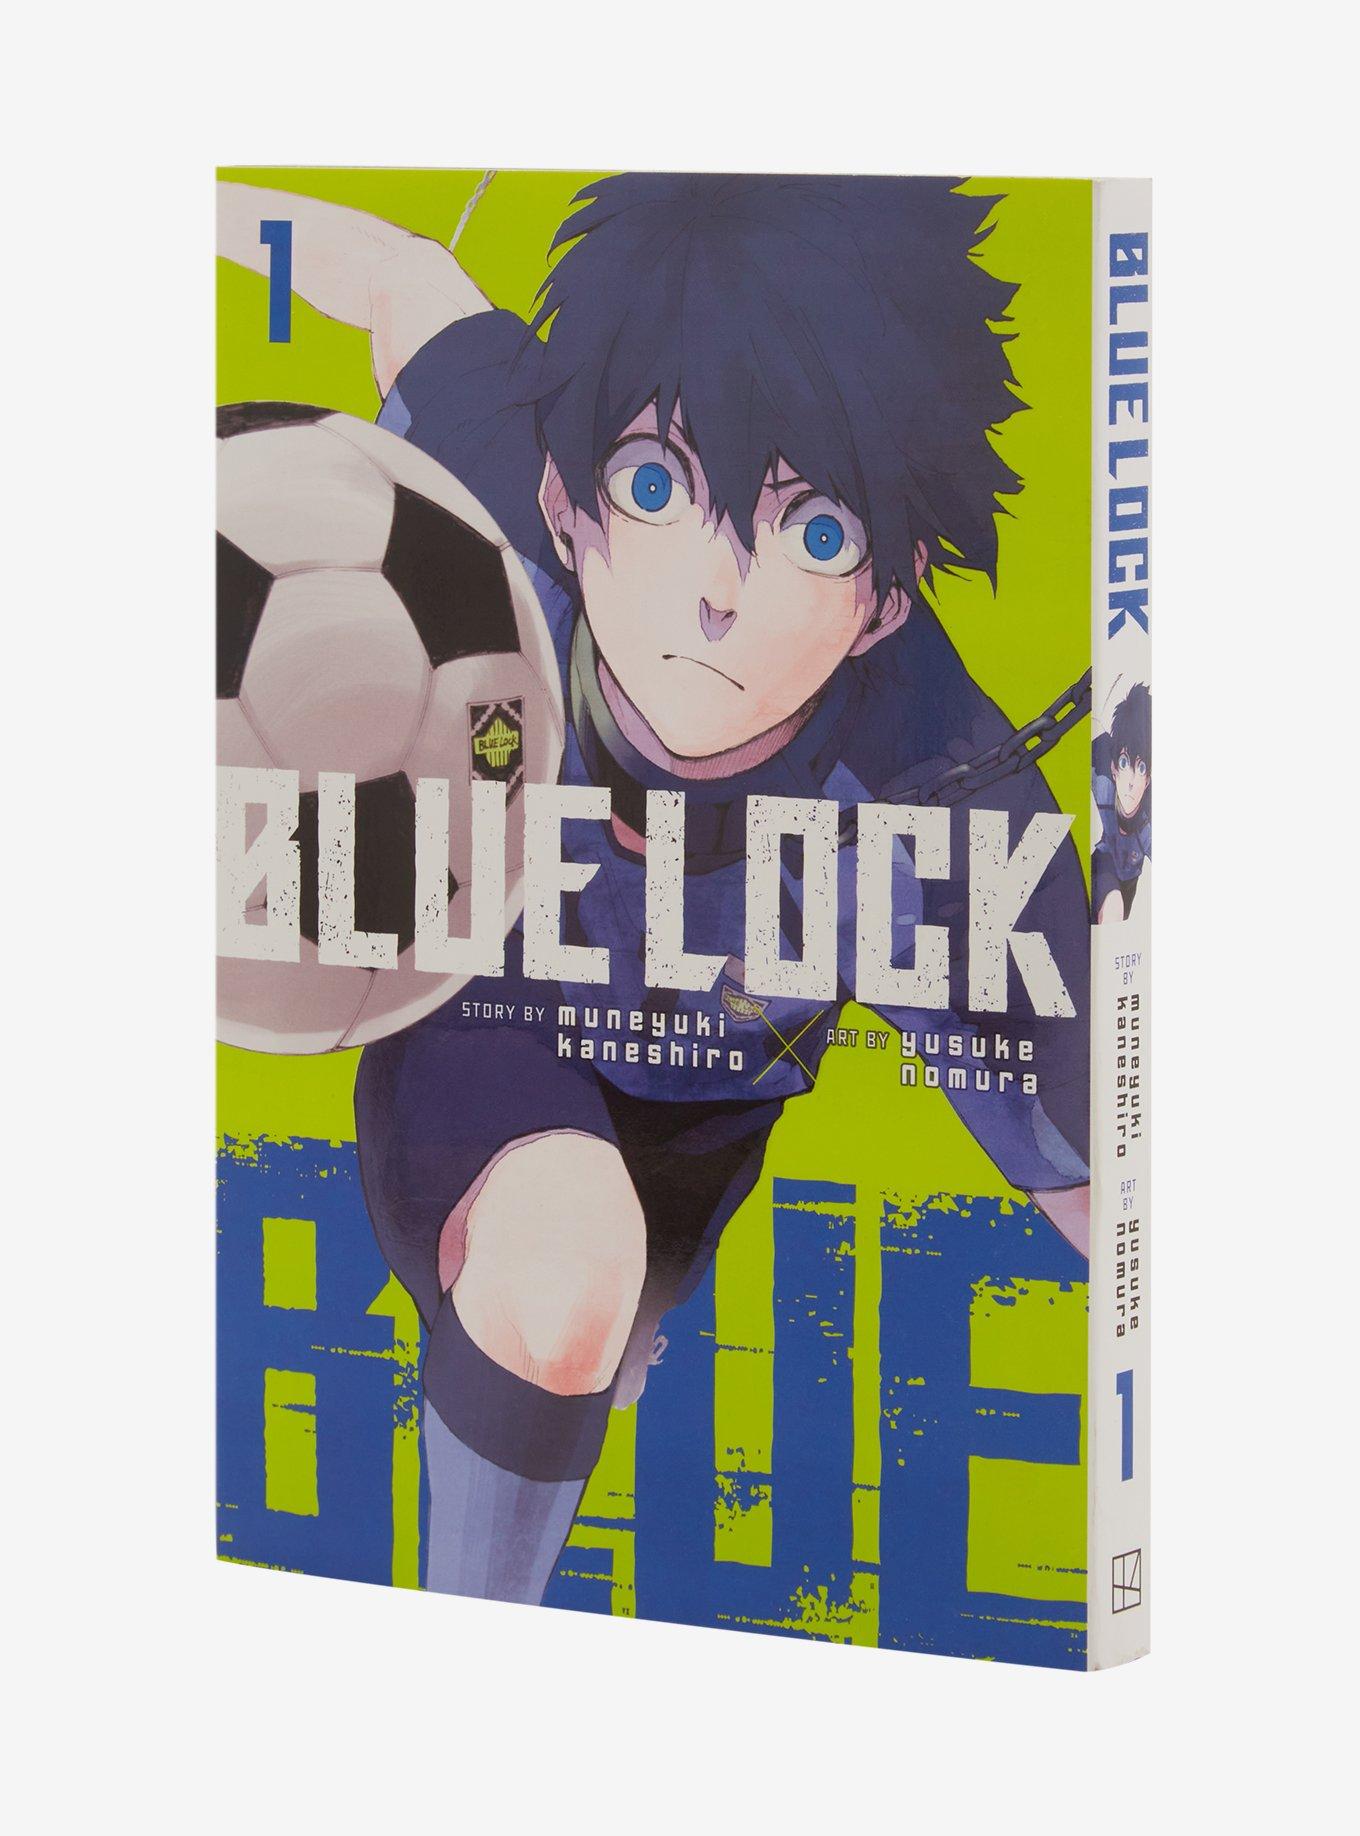 BLUELOCK: 6 Reasons Why You Need To Give This New Sports Anime A